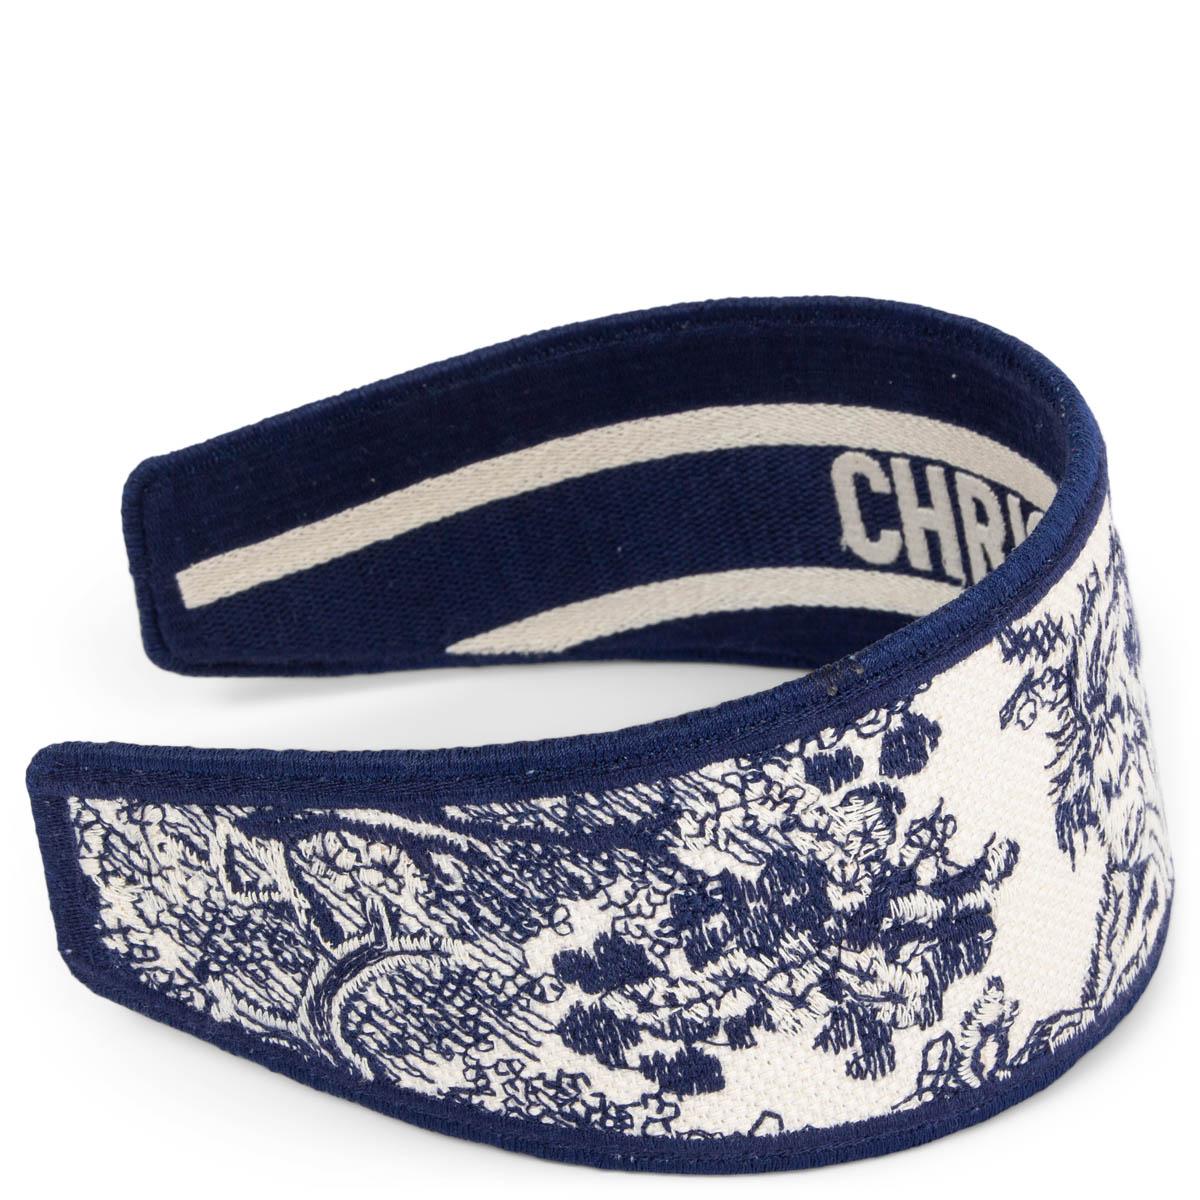 CHRISTIAN DIOR navy blue & white 2020 TOILE DE JOUY Headband OS For Sale